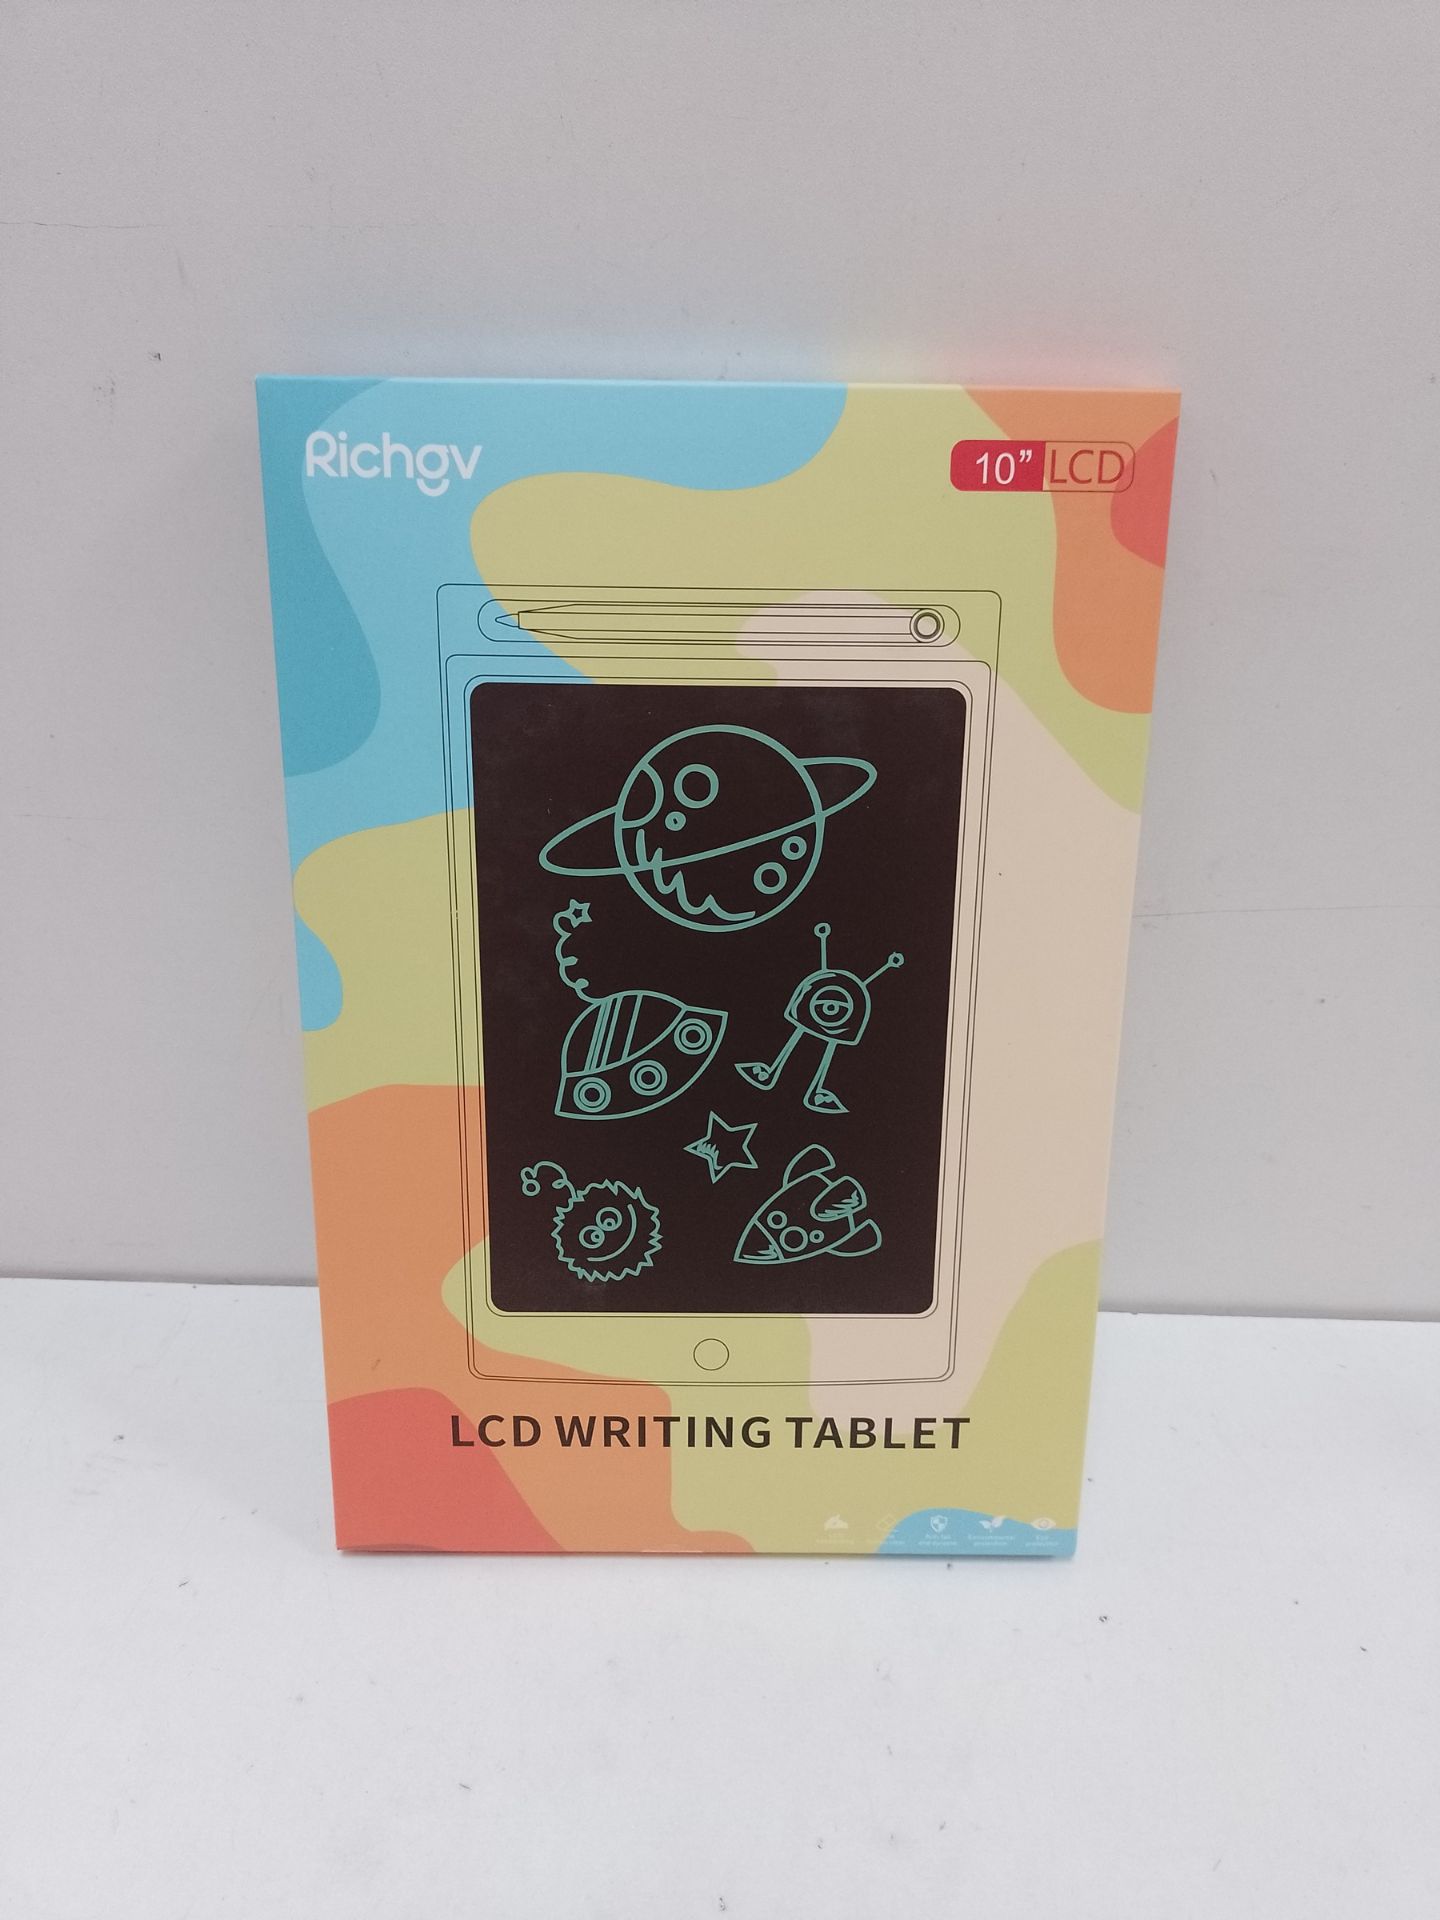 RRP £13.23 Richgv LCD Writing Tablet for Kids - Image 2 of 2